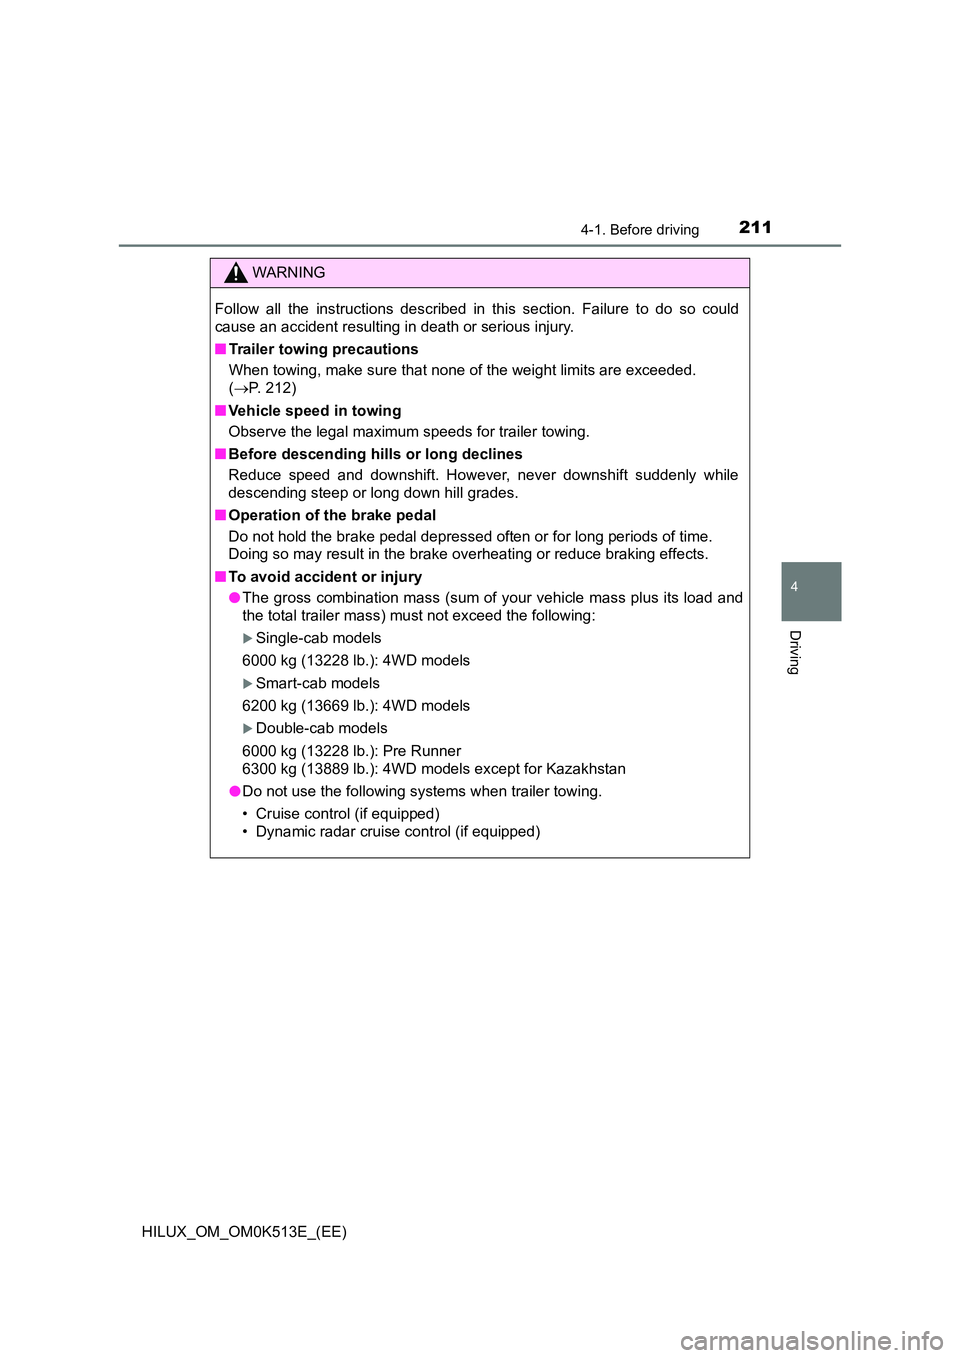 TOYOTA HILUX 2022  Owners Manual 2114-1. Before driving
4
Driving
HILUX_OM_OM0K513E_(EE)
WARNING
Follow all the instructions described in this section. Failure to do so could 
cause an accident resulting in death or serious injury. 
